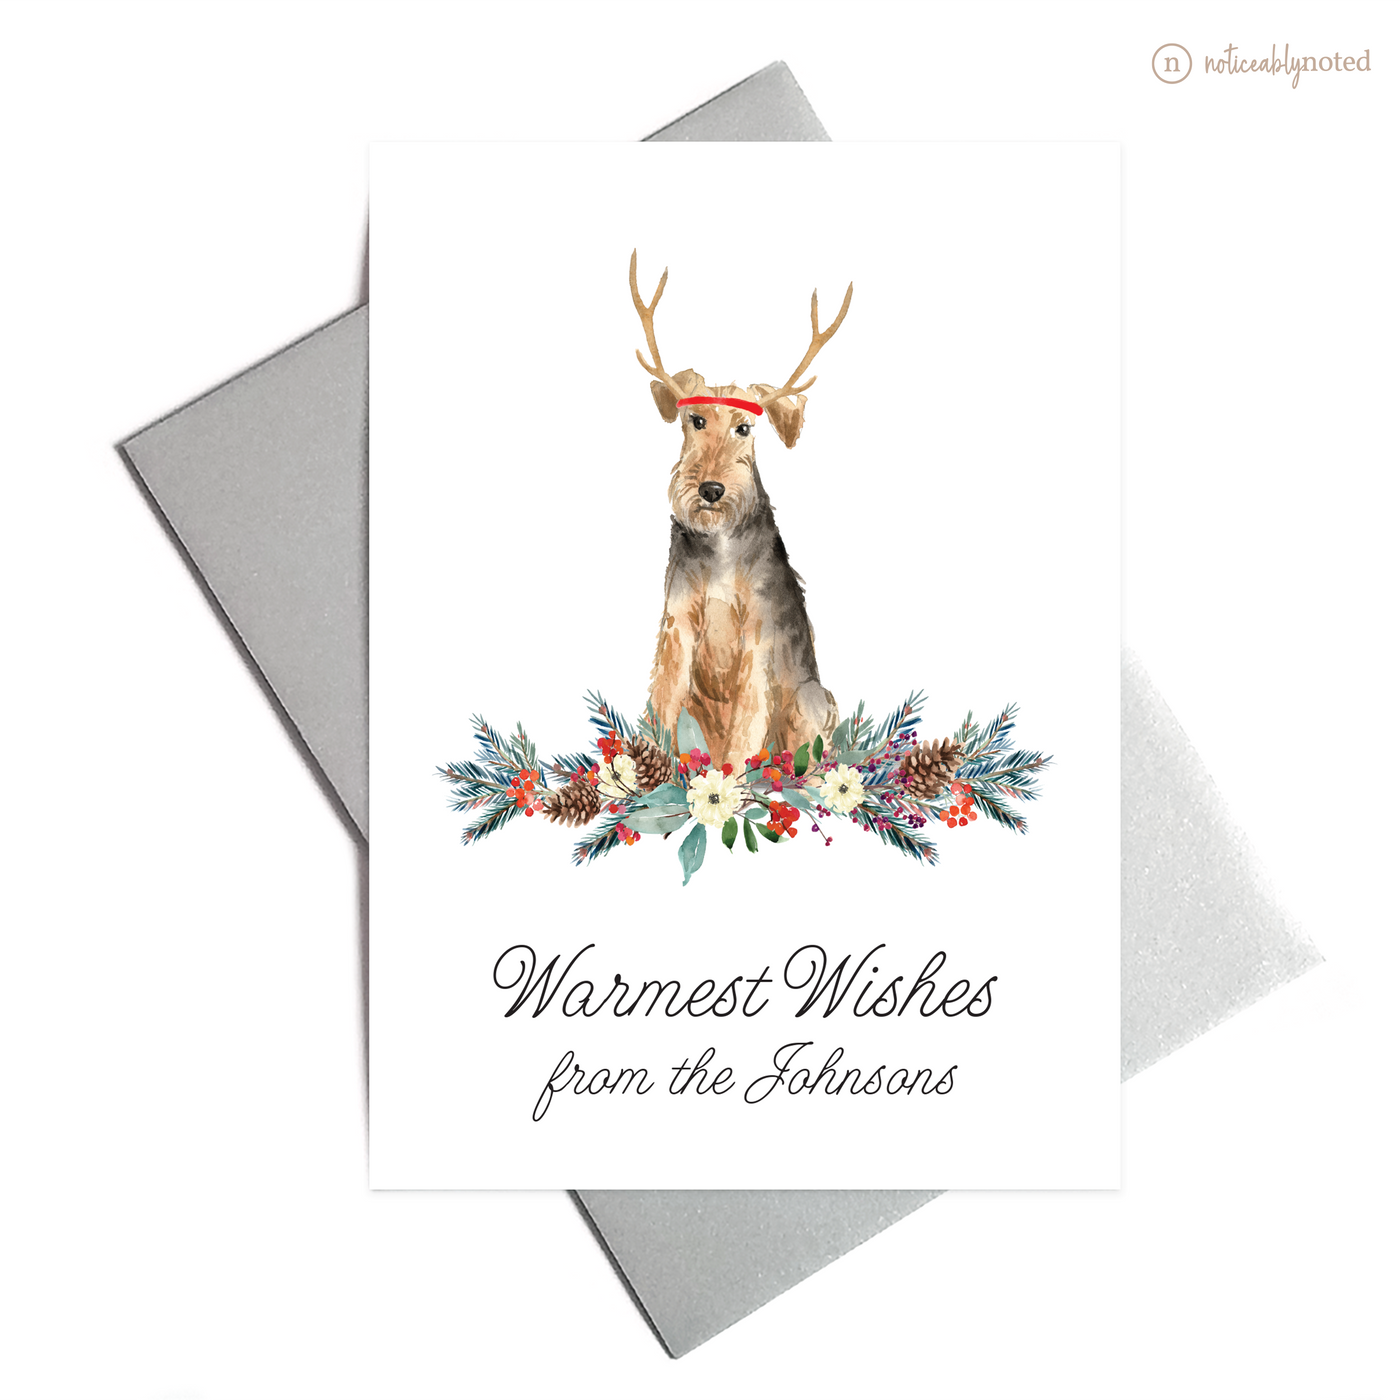 Welsh Terrier Christmas Cards | Noticeably Noted